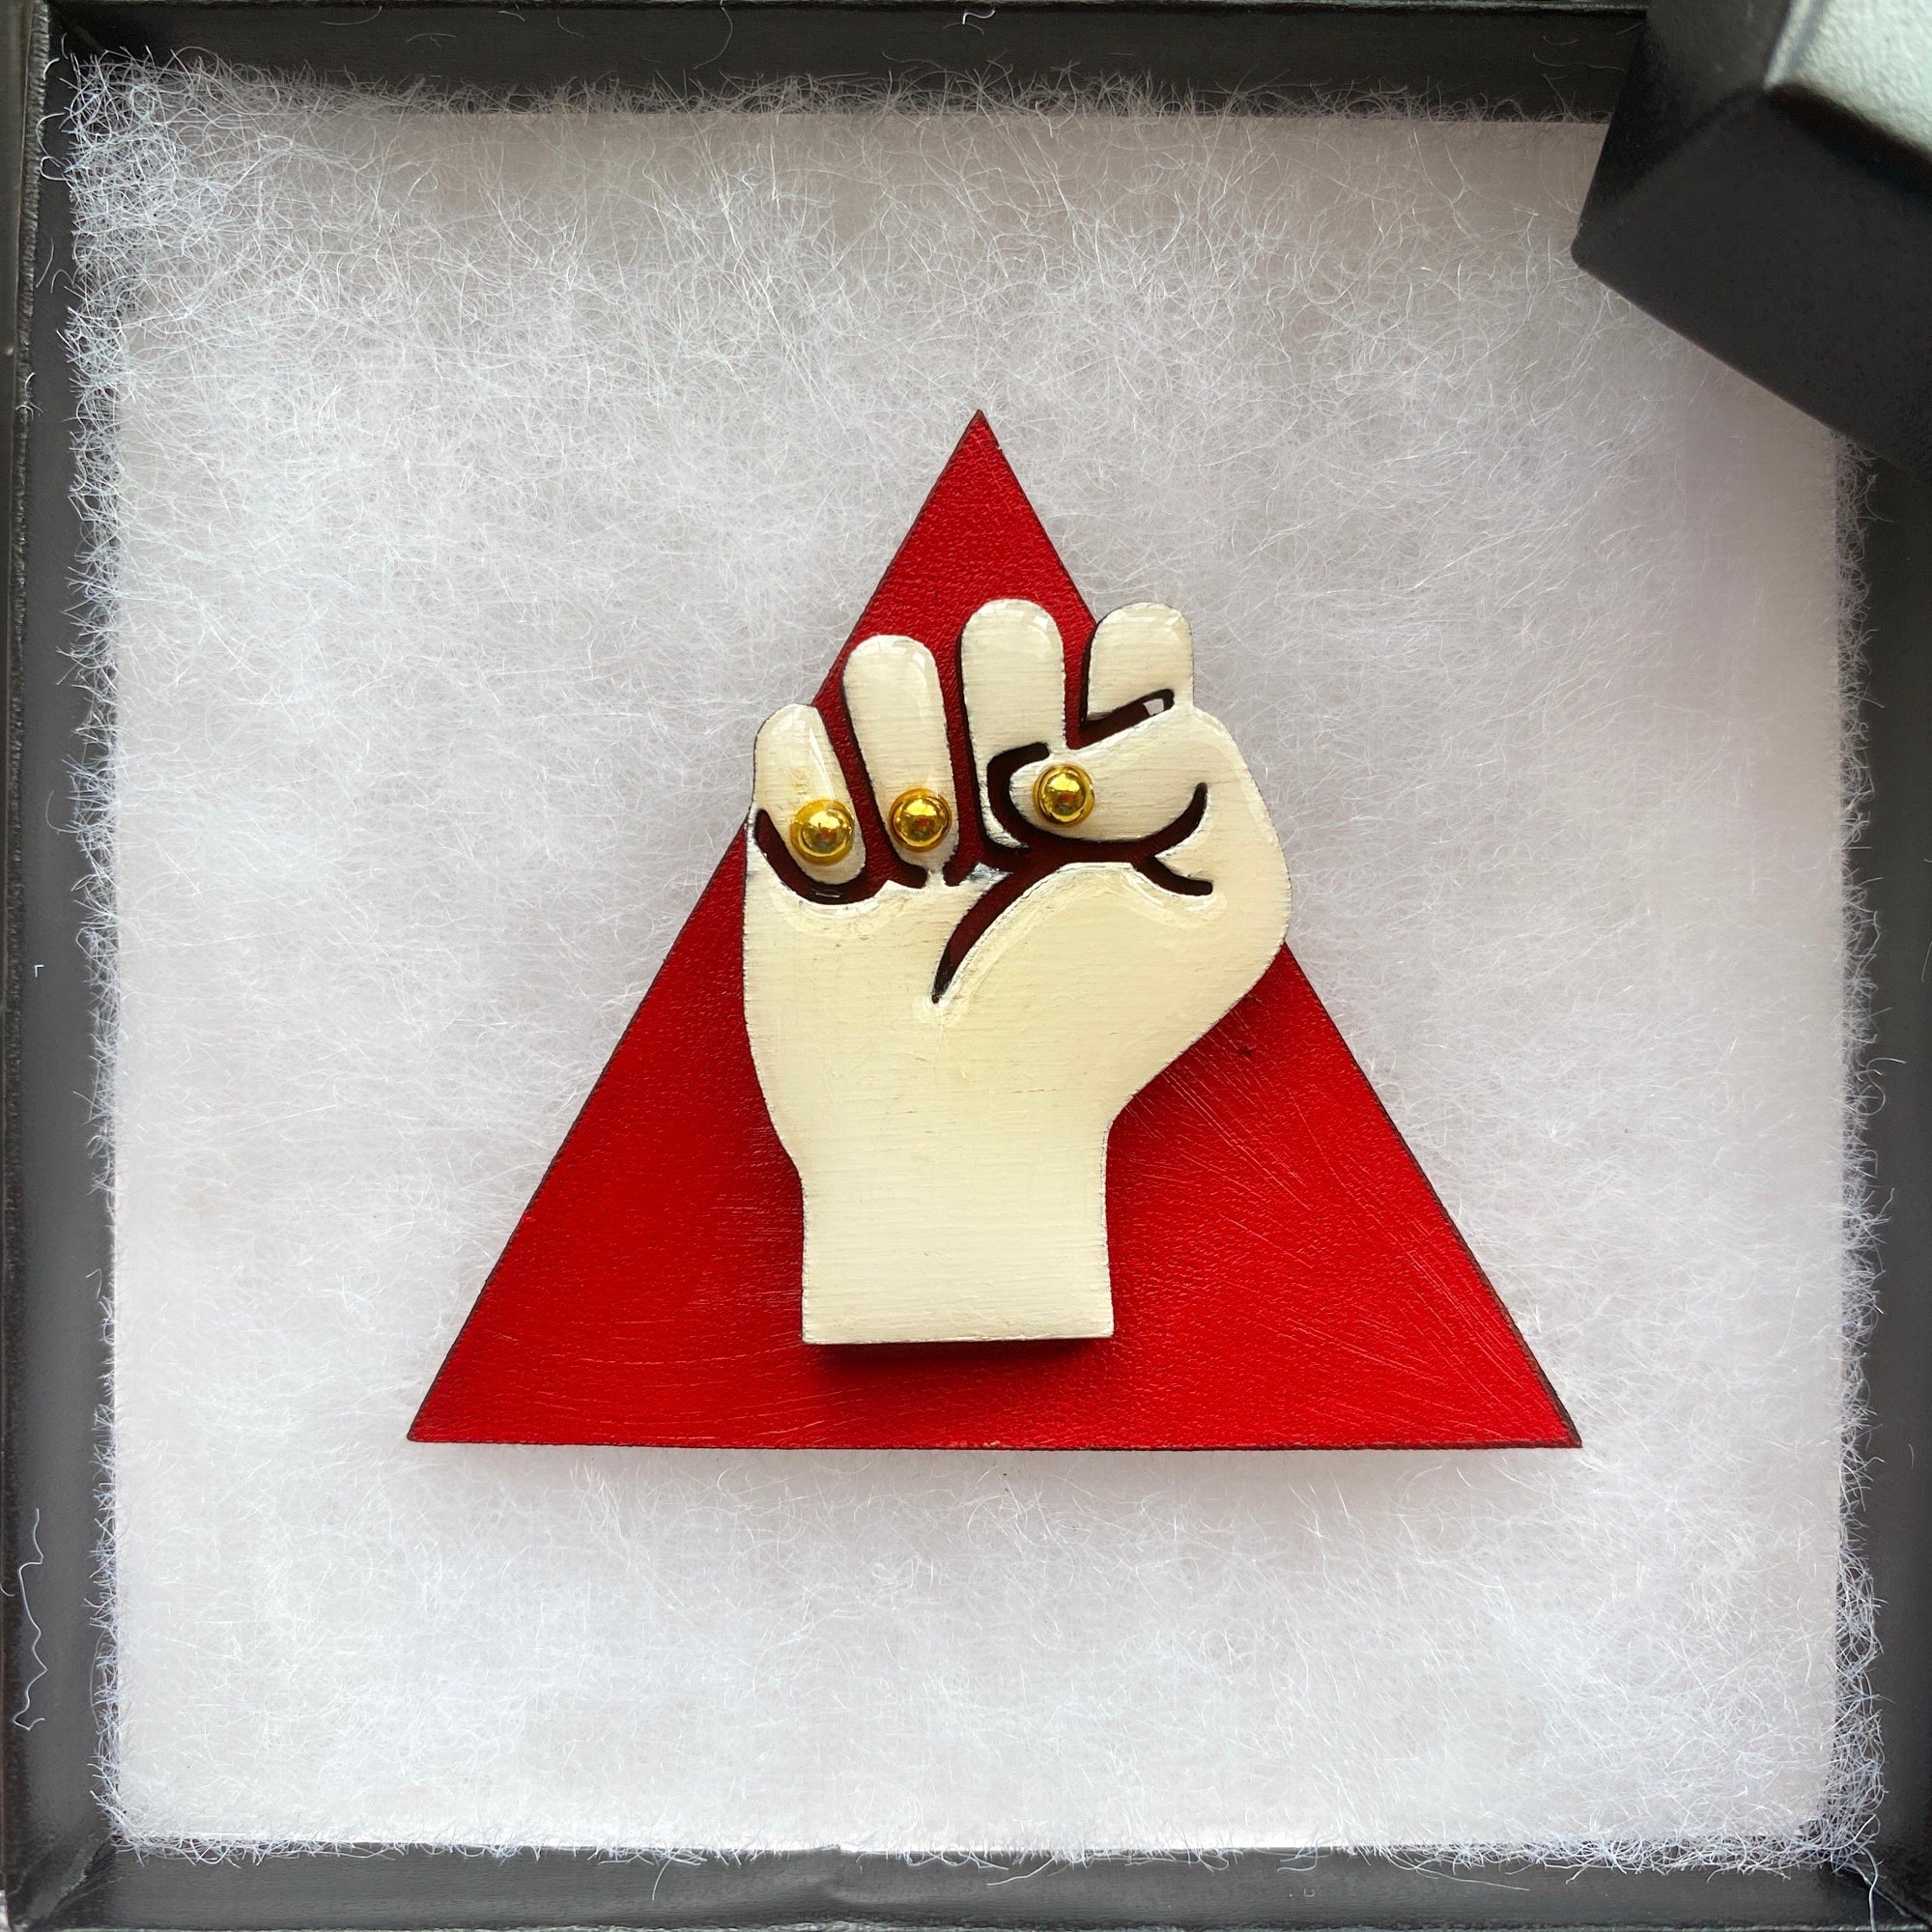 Crimson and cream Delta Sigma Theta black power brooch. Raise your fist in solidarity against social injustice. Fight for equality. 